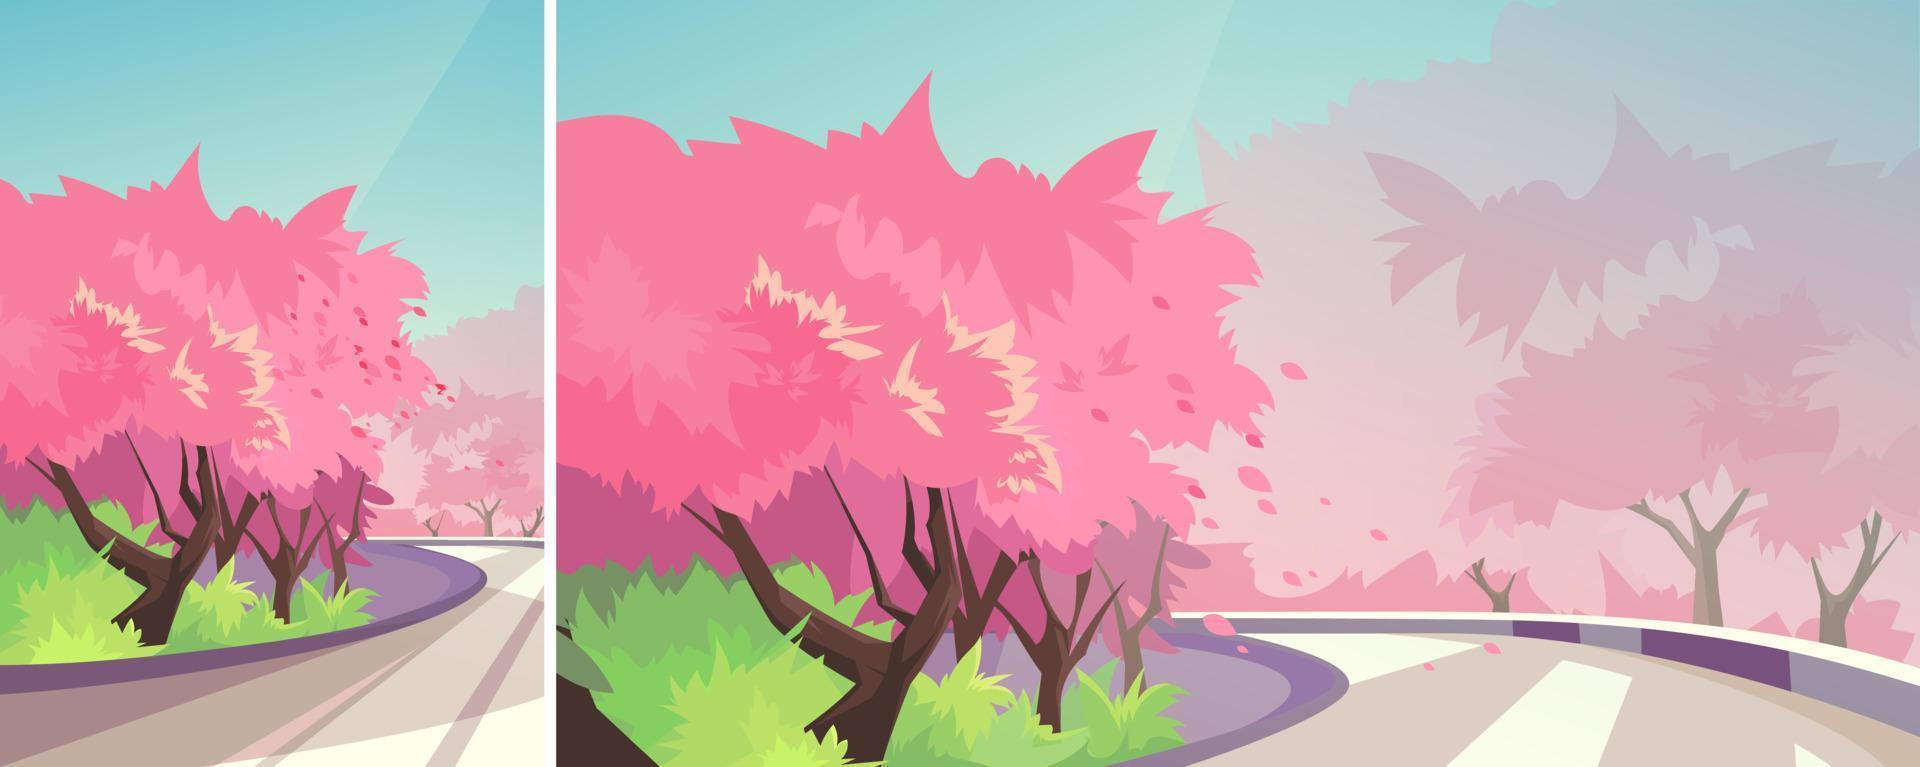 Cherry blossoms along the road. Nature landscape in different formats. vector